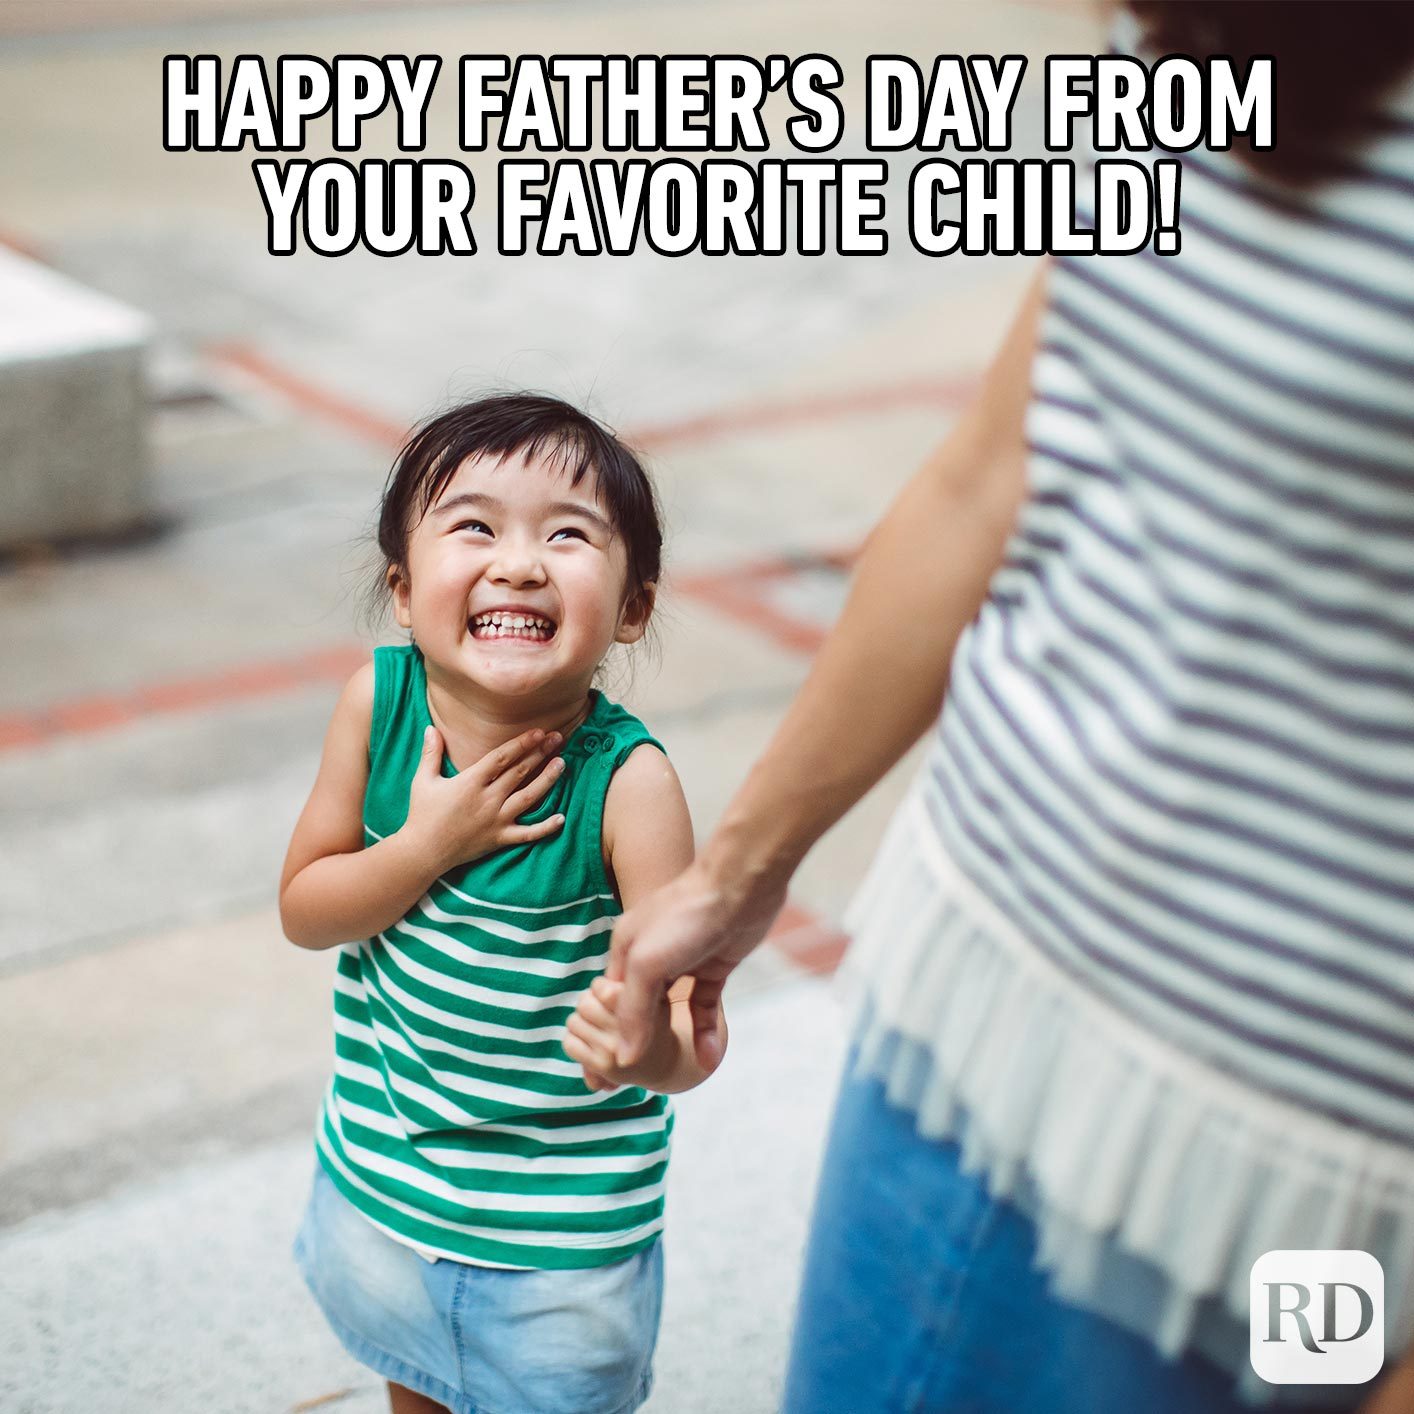 Child holding hands with mother and laughing. Meme text: Happy Father’s Day from your favorite child!